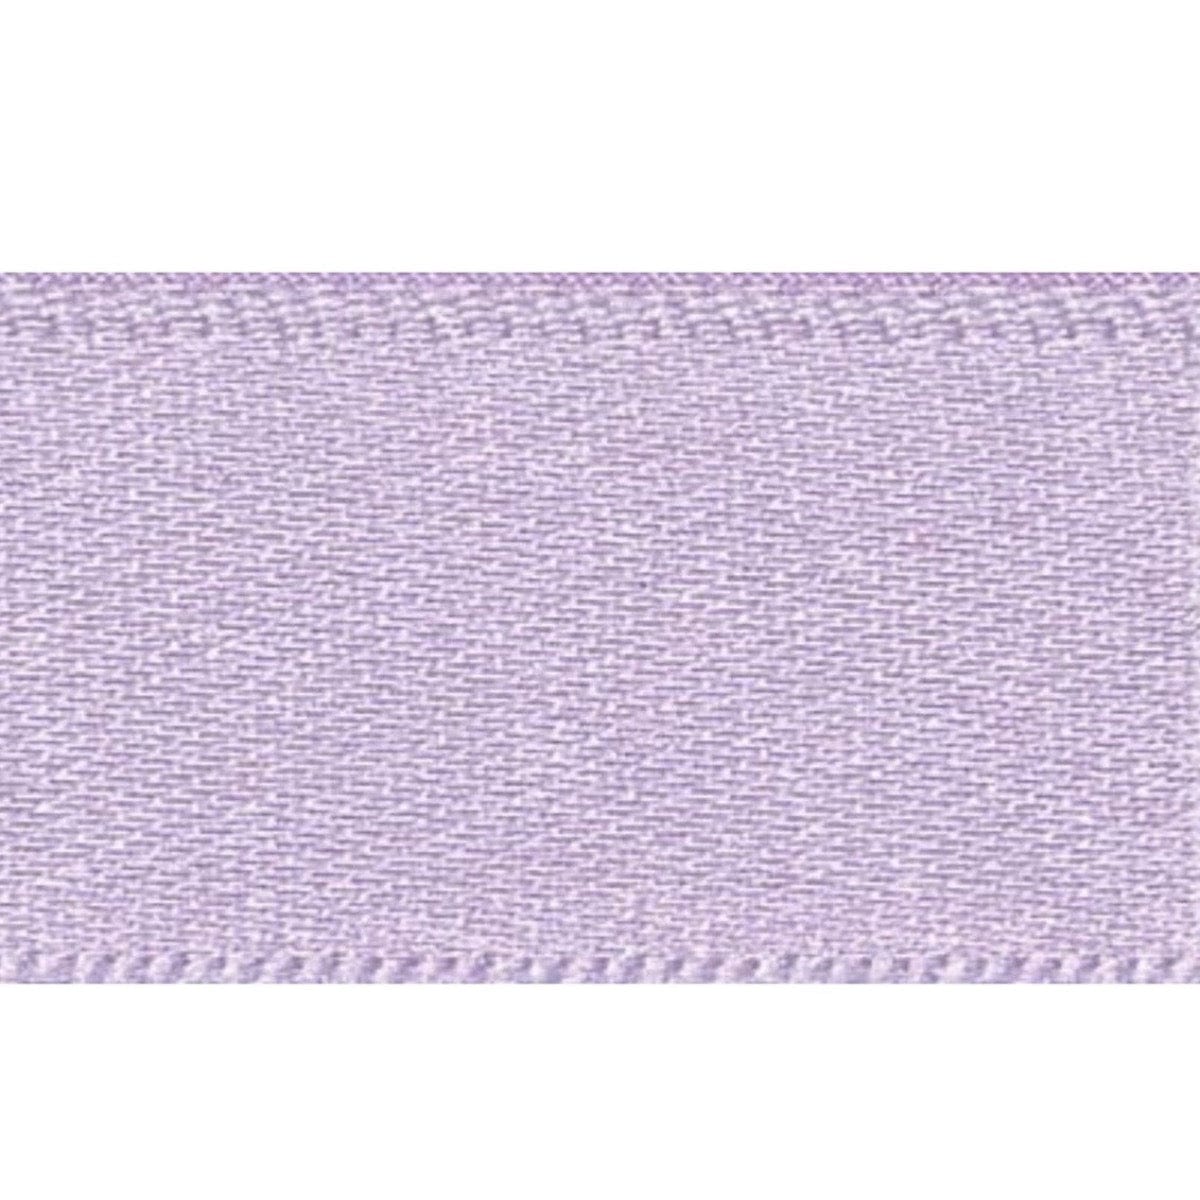 Double Faced Satin Ribbon Orchid Purple: 10mm wide. Price per metre.